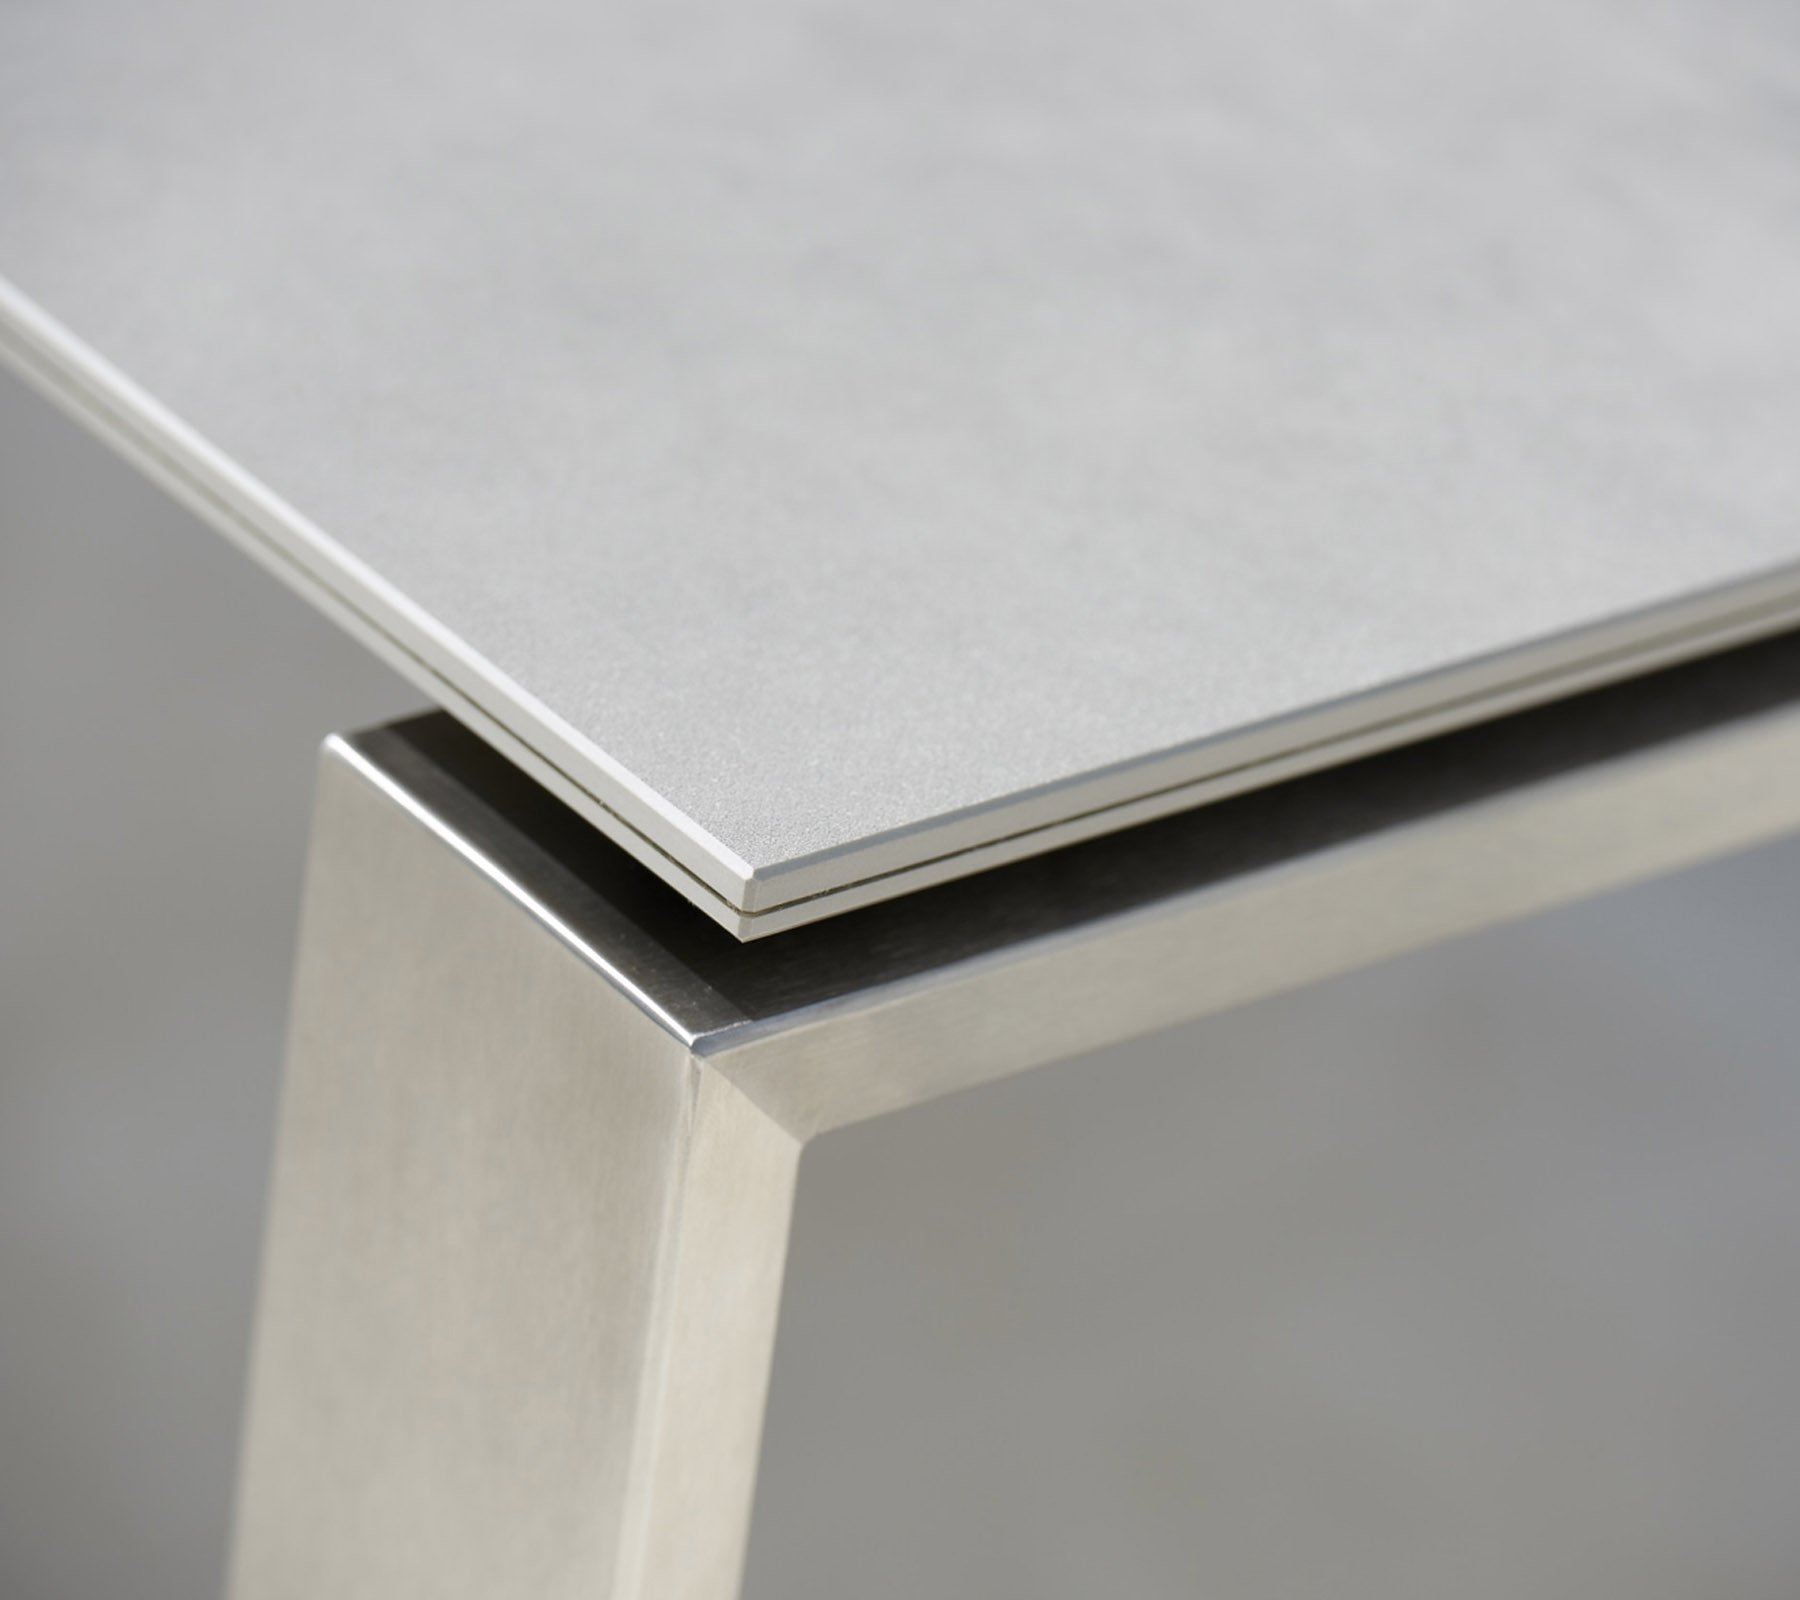 Edge Dining Table from Cane-line, designed by Strand+Hvass